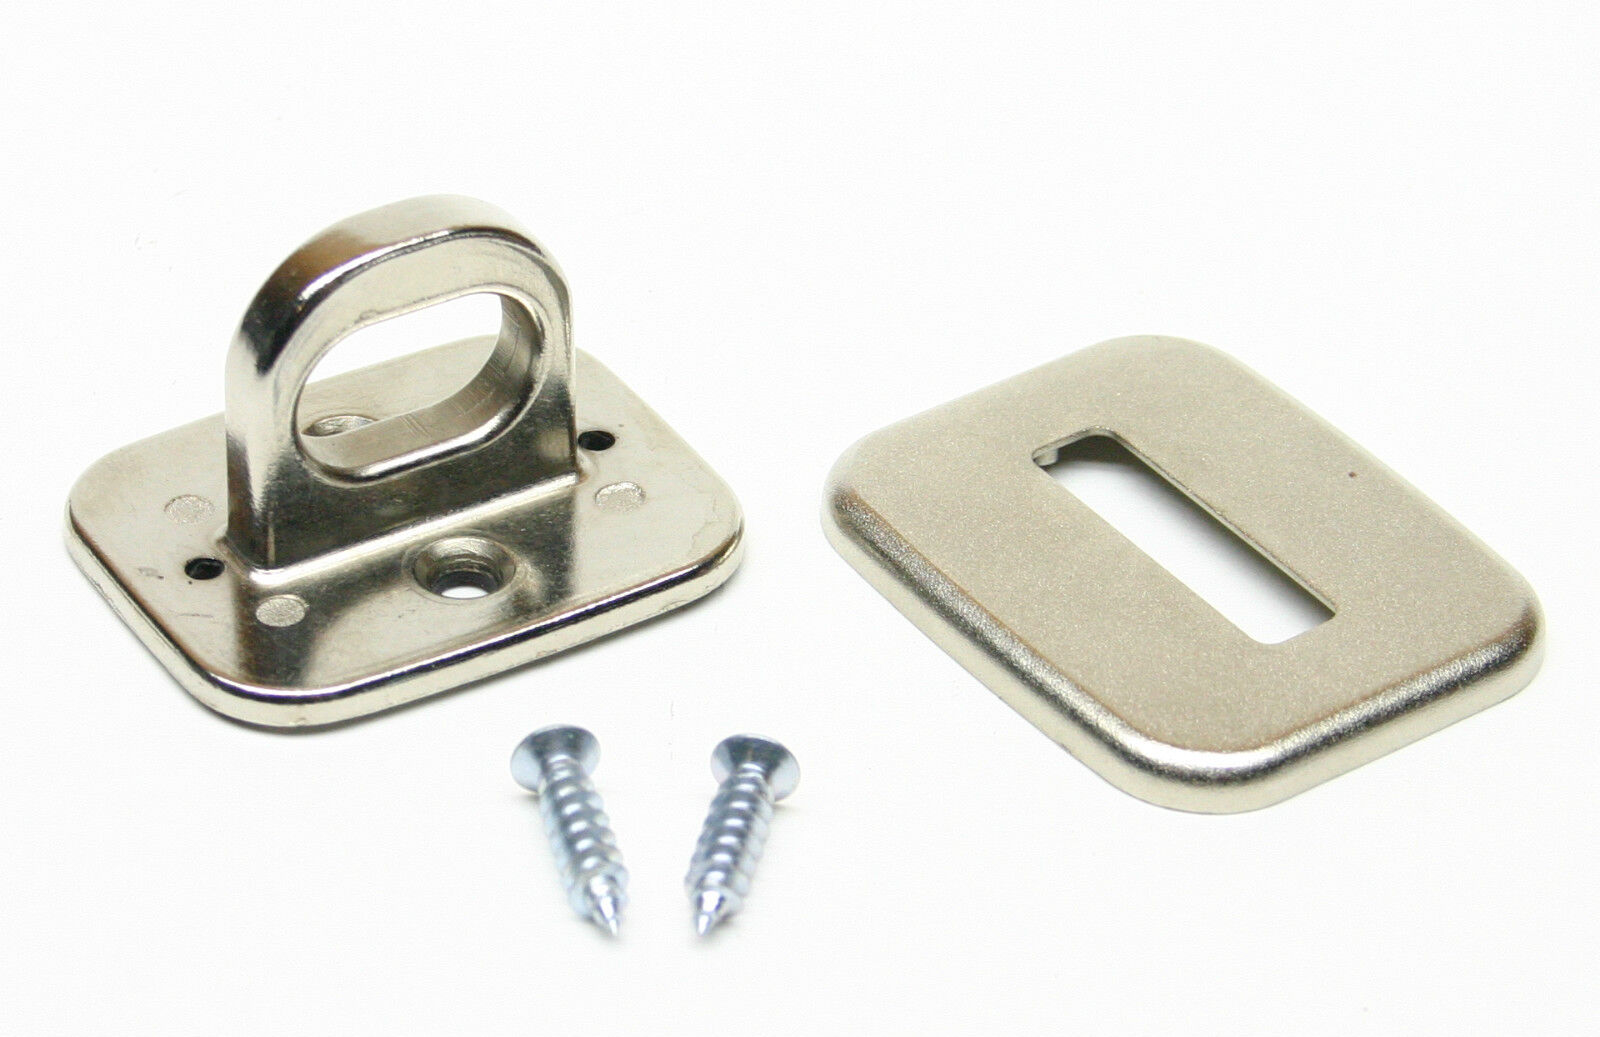 Desktop Anchor Plate for Computer Security Cable Lock ~ Screw & Adhesive